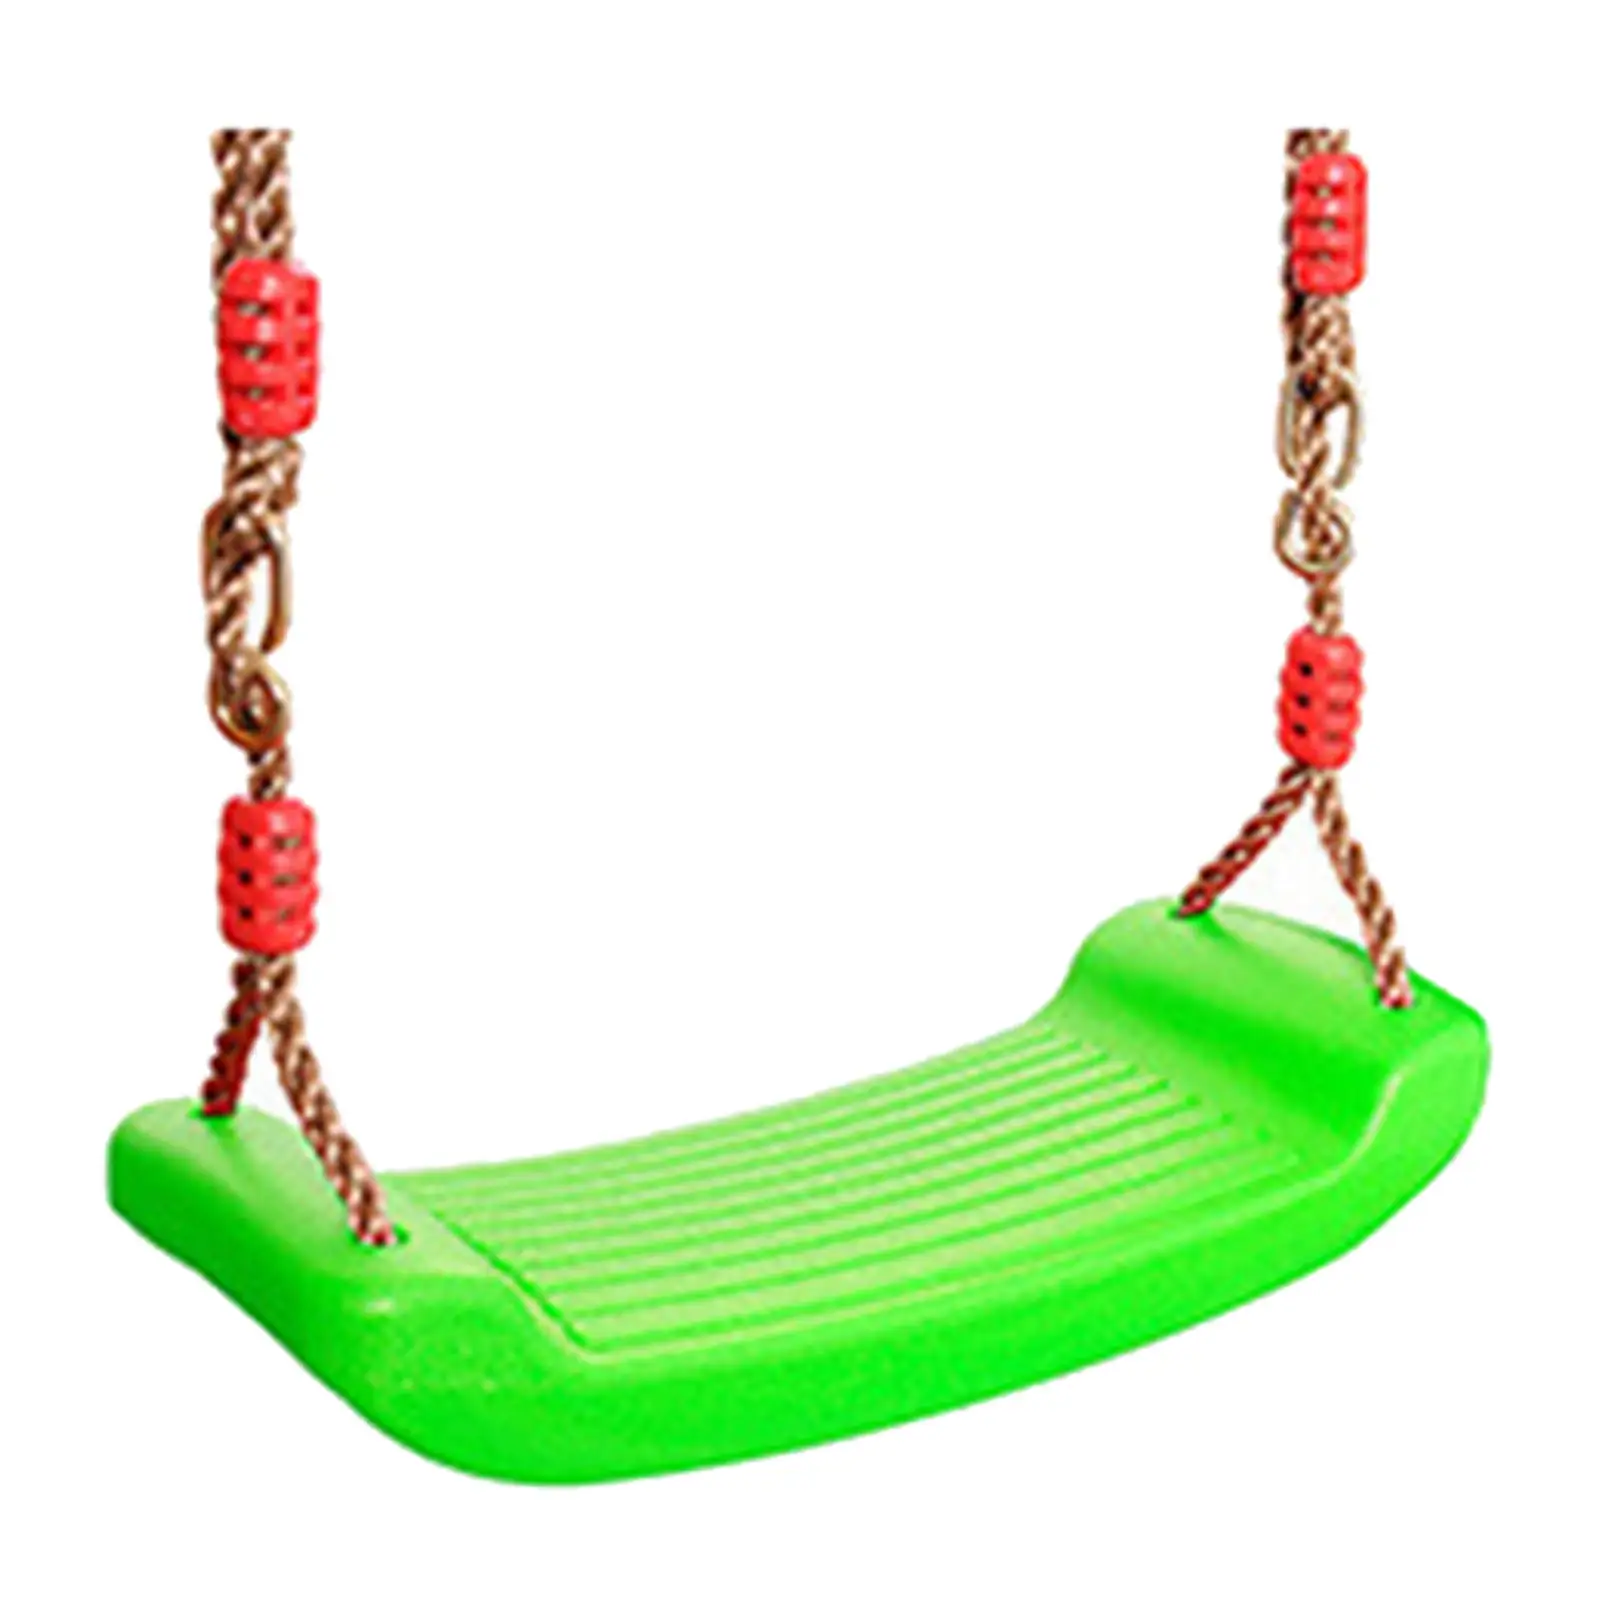 Swing Seat Set Entertainment Curved Board Playset Rope Adjustable Rainbow Swing Chair Flying Toy for Jungle Outdoor Indoor Adult